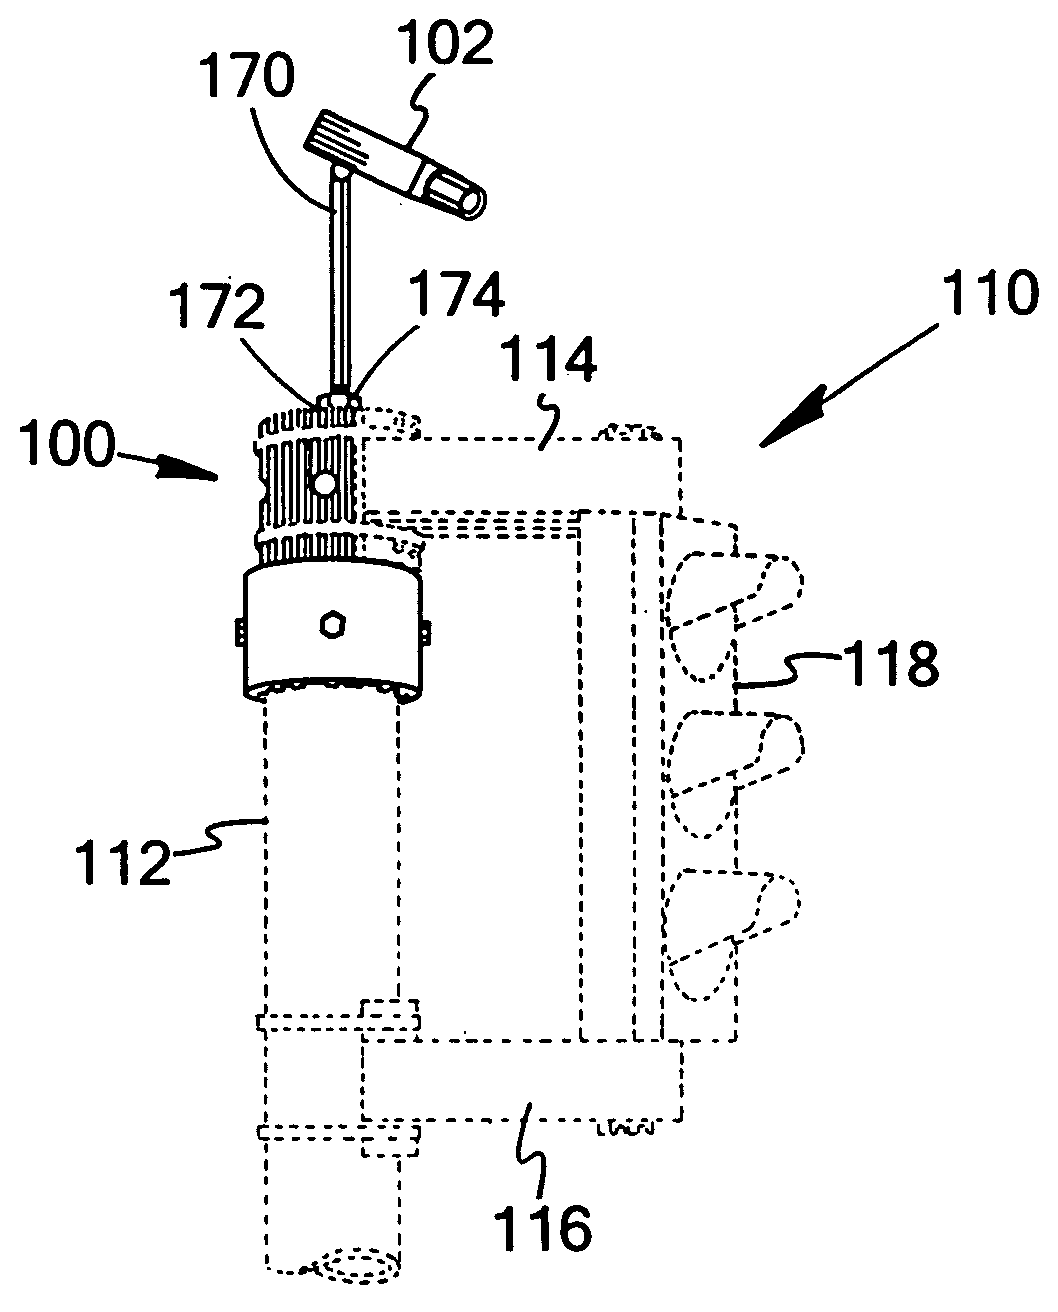 Accessory mounting device for a traffic light assembly